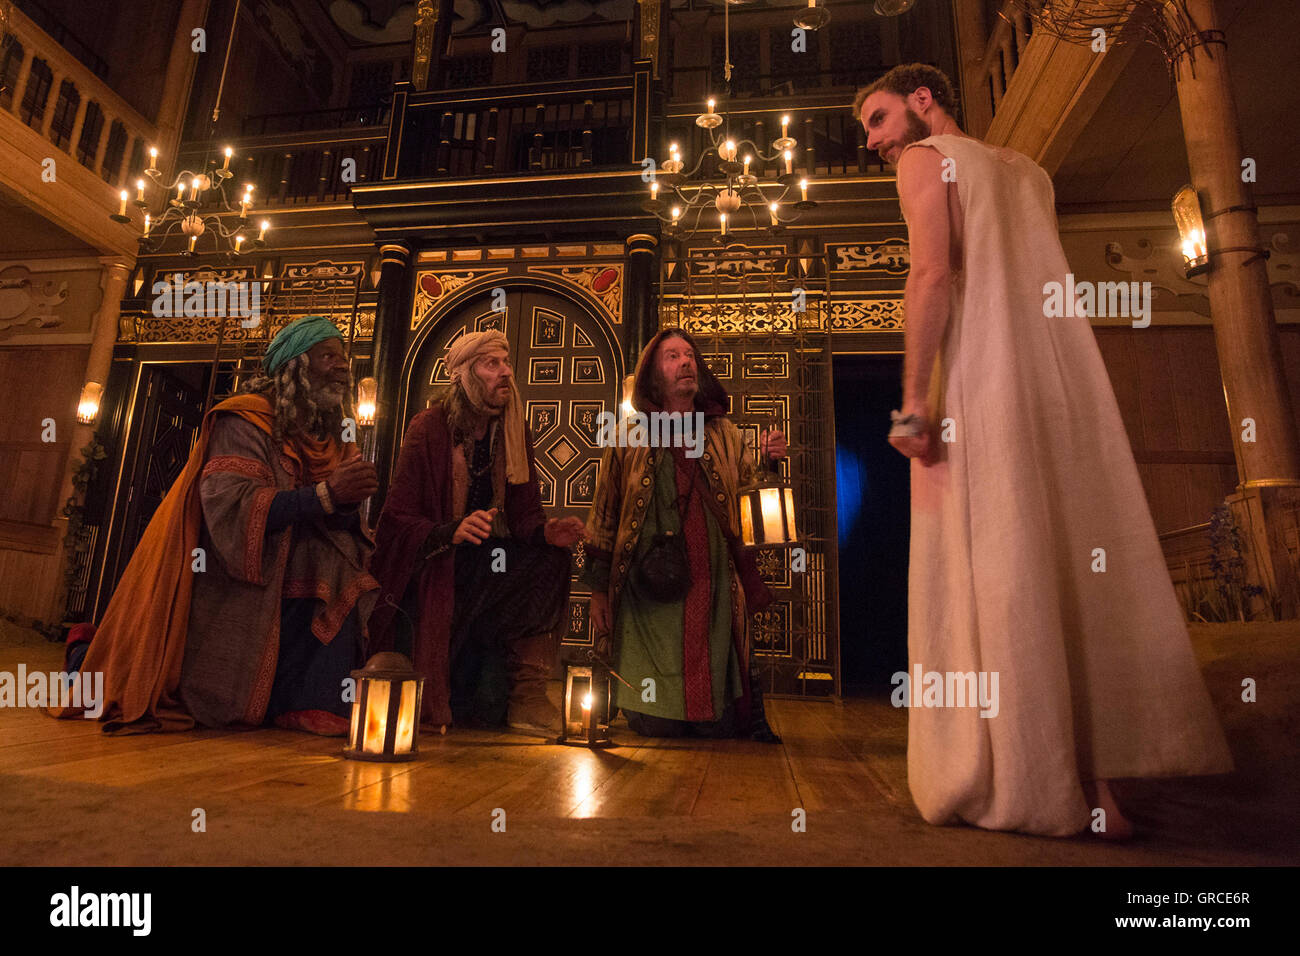 London, UK. 6 September 2016. L-R: Joseph Marcell (Caspar), Richard Bremmer (Balthasar), Kevin Moore (Melchior) and Samuel Collings (Jesus). The comedy The Inn at Lydda written by John Wolfson and directed by Andy Jordan runs at the Sam Wanamaker Playhouse from 2 September to 27 September 2016. Stock Photo